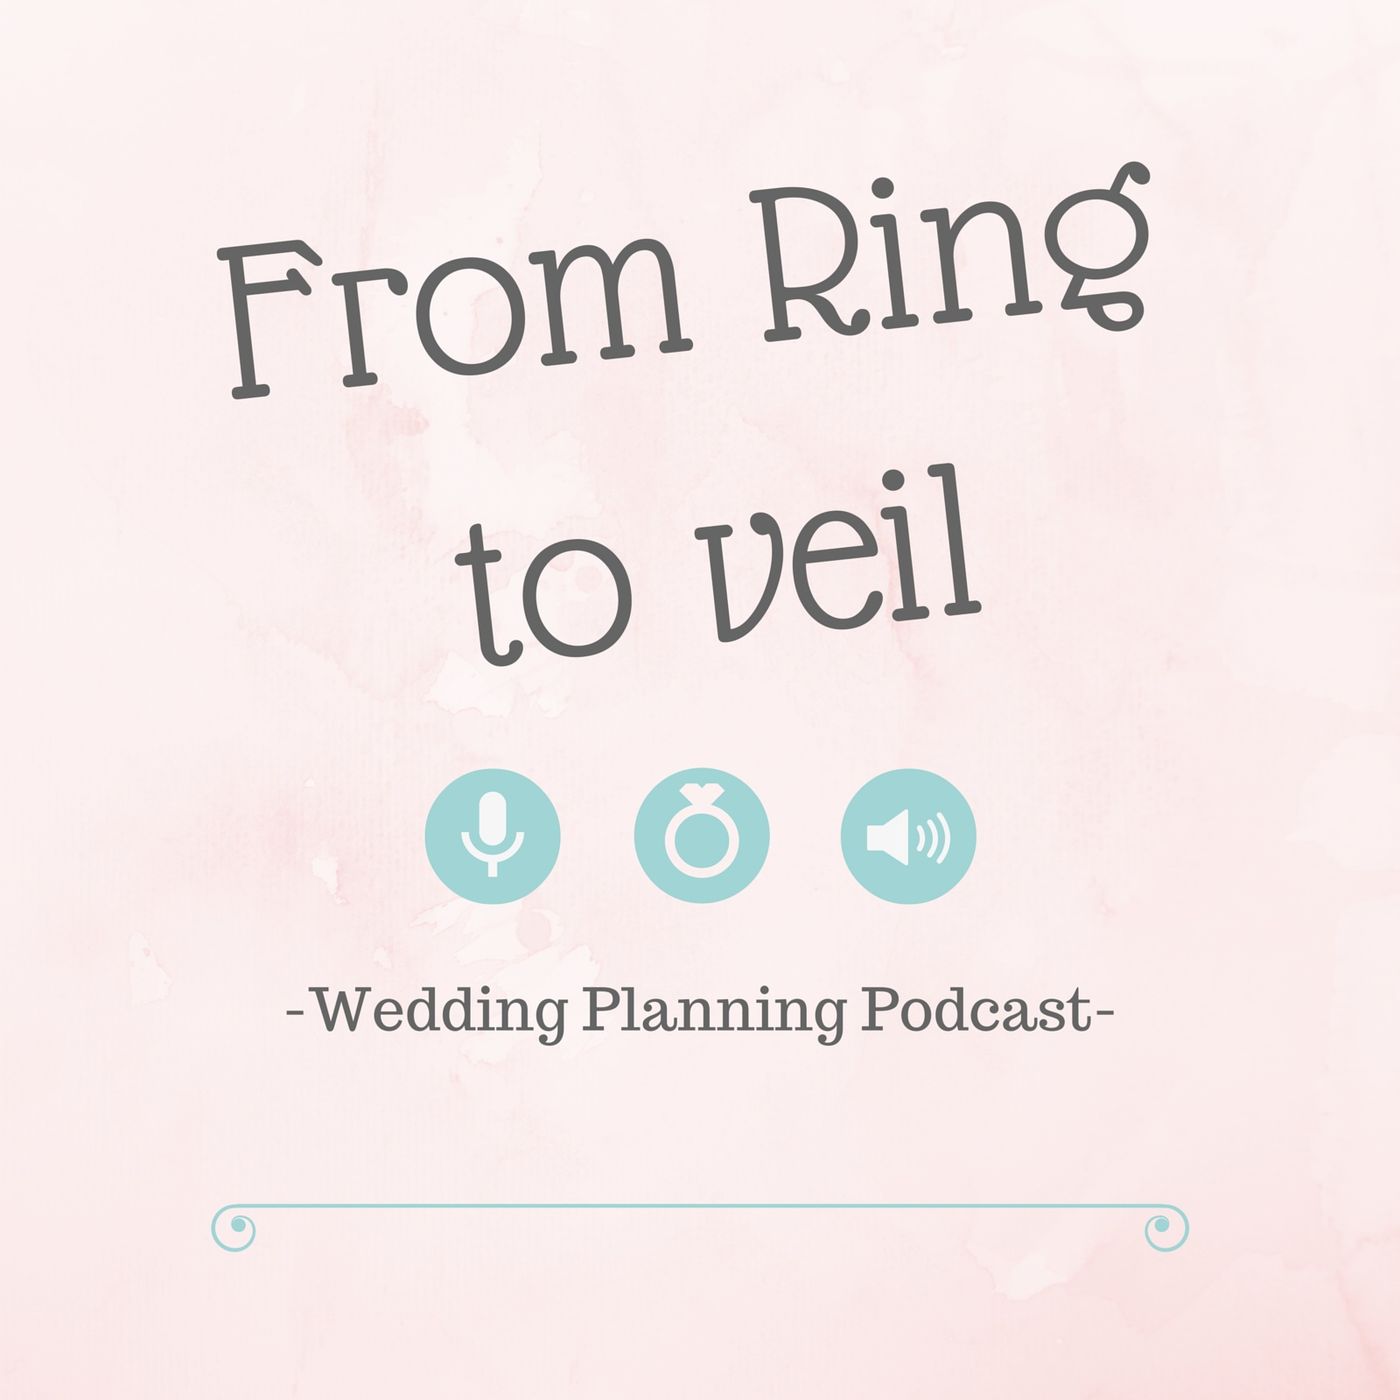 From Ring to Veil - Wedding Planning